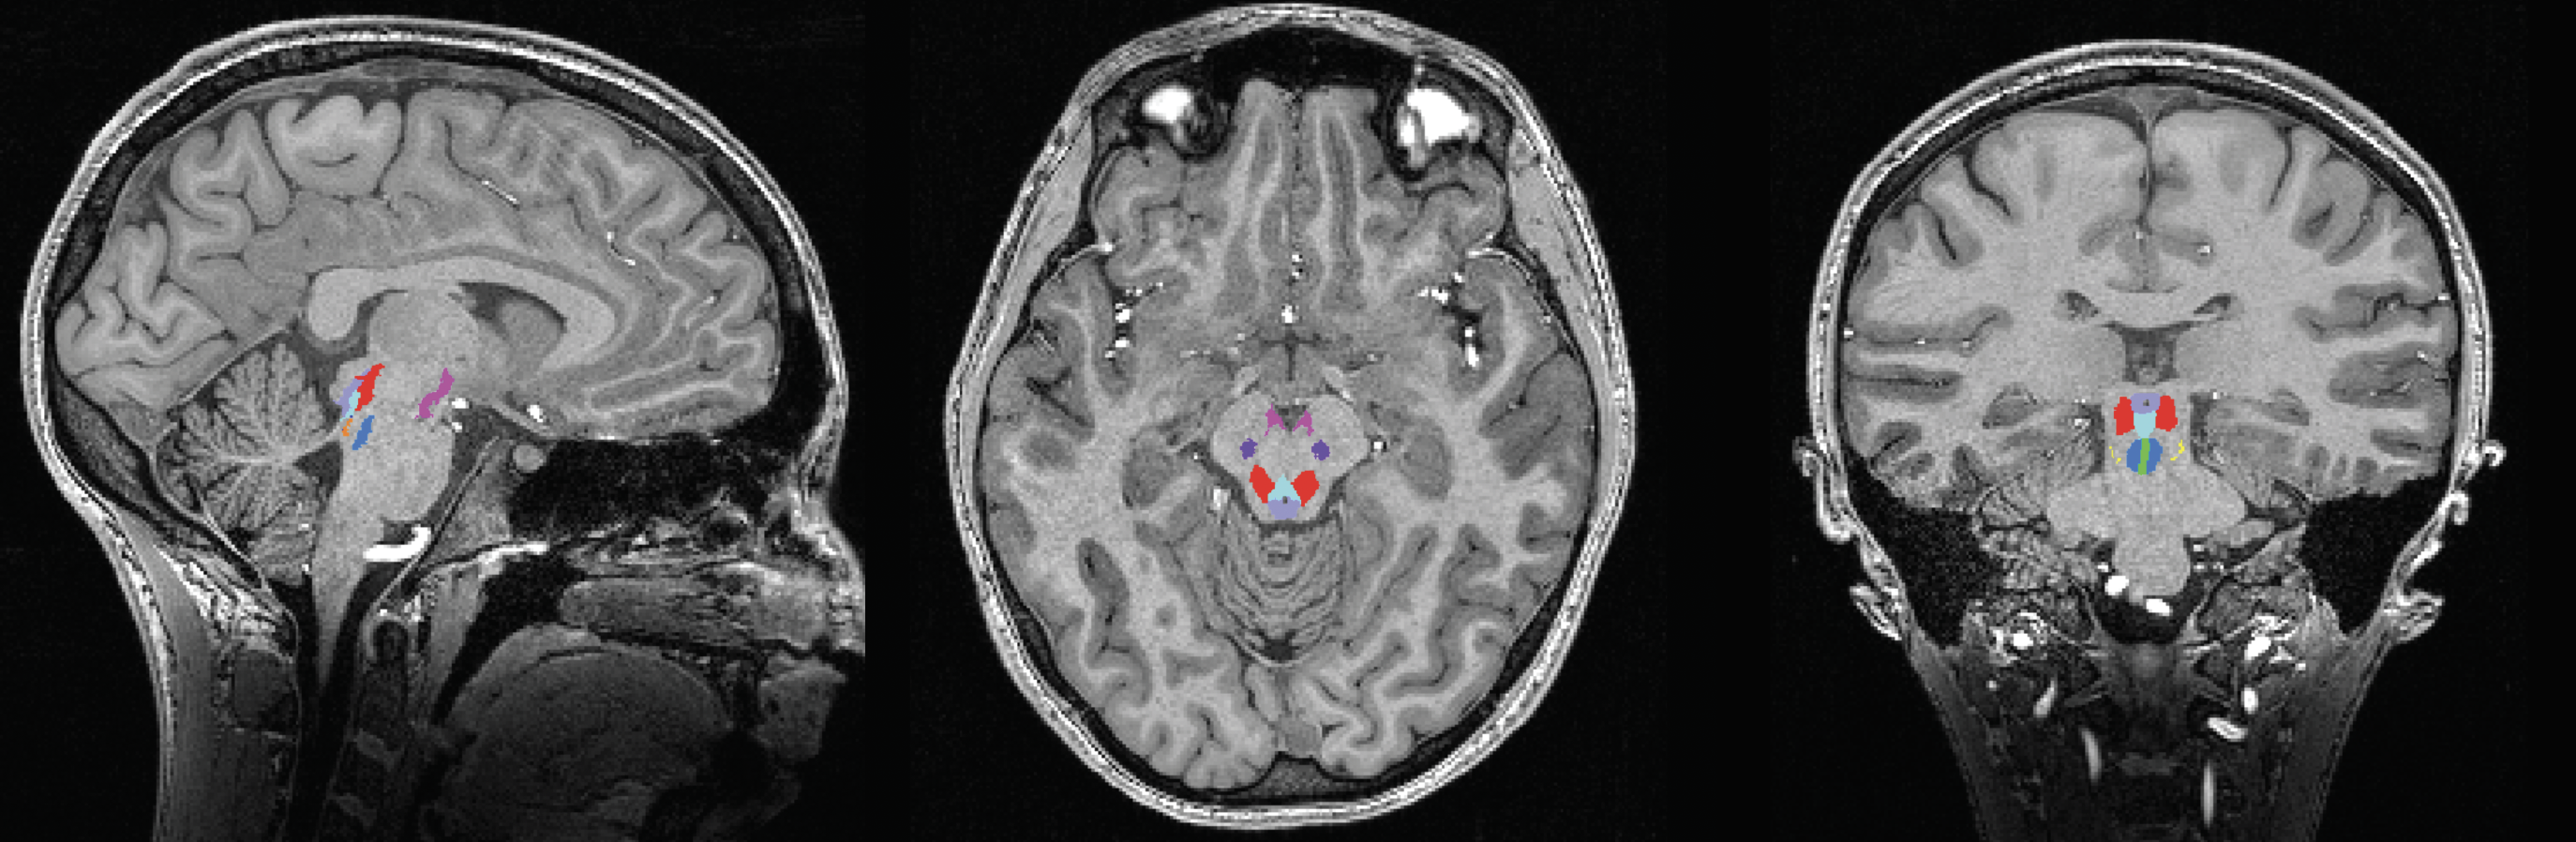 Three grayscale MRI images provide different cross sections of the head and brain. In the very middle are small blue and red colored spots